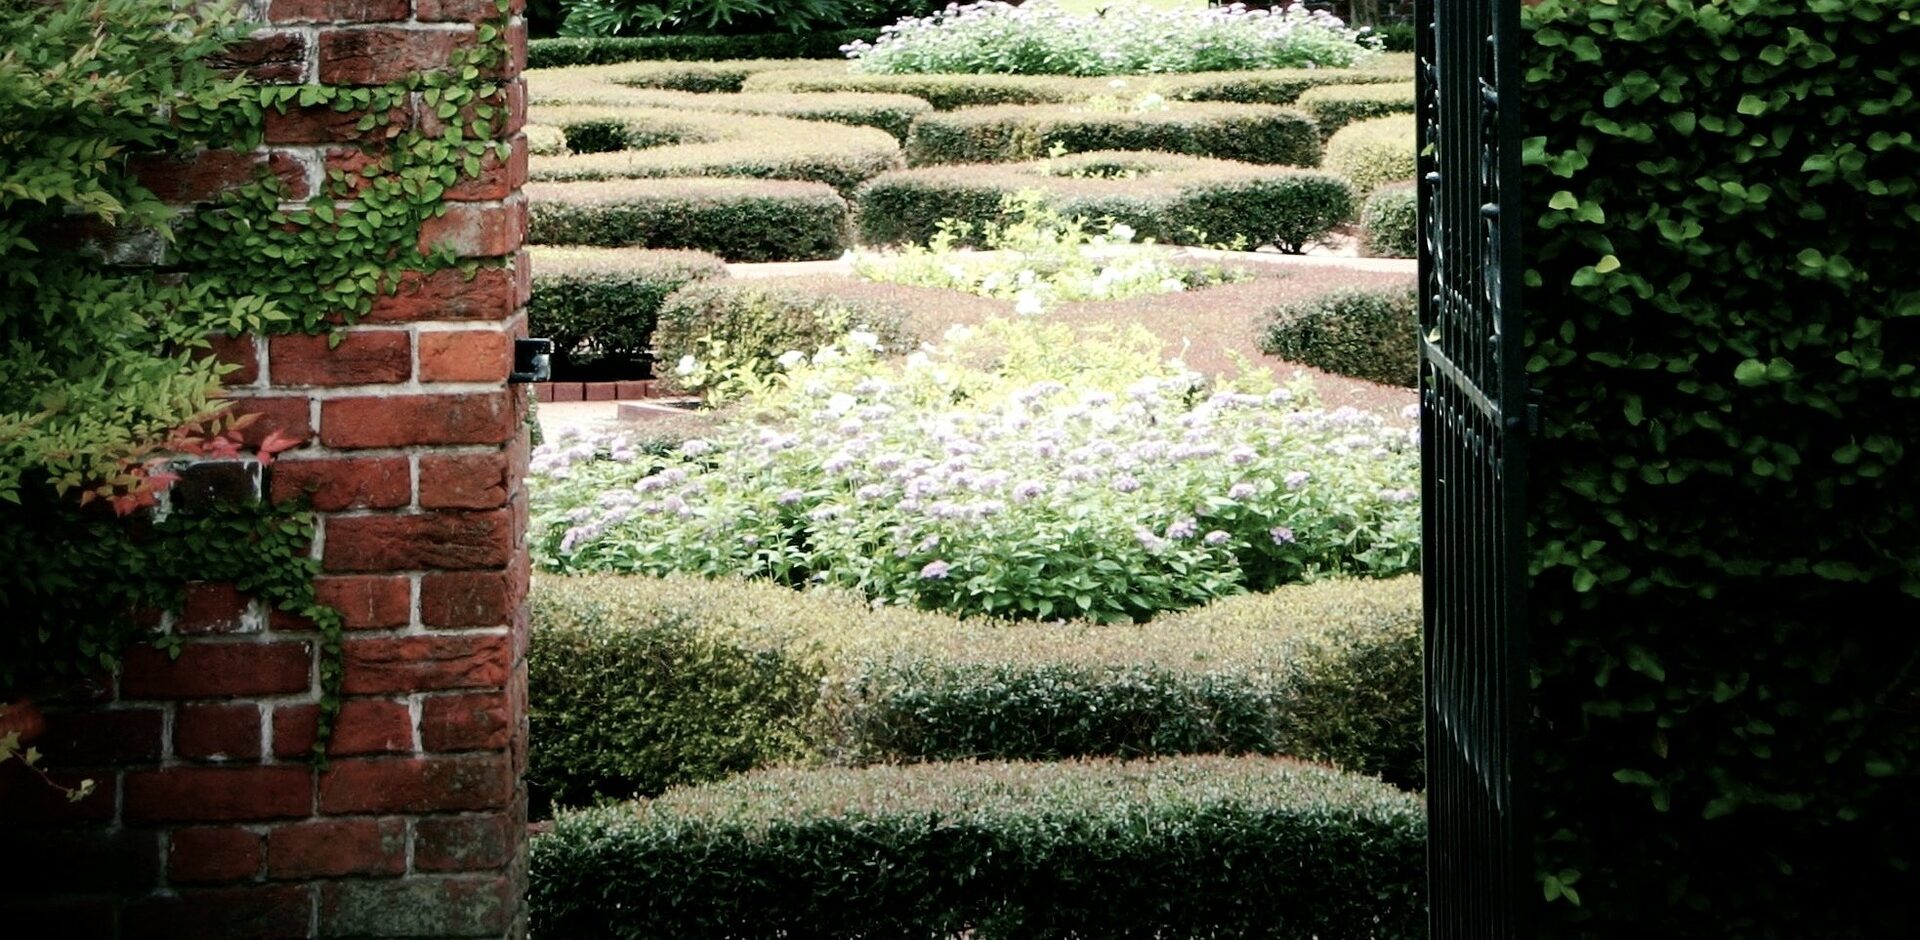 Walled Gardens In AdTech- What Do They Mean For Your Business?